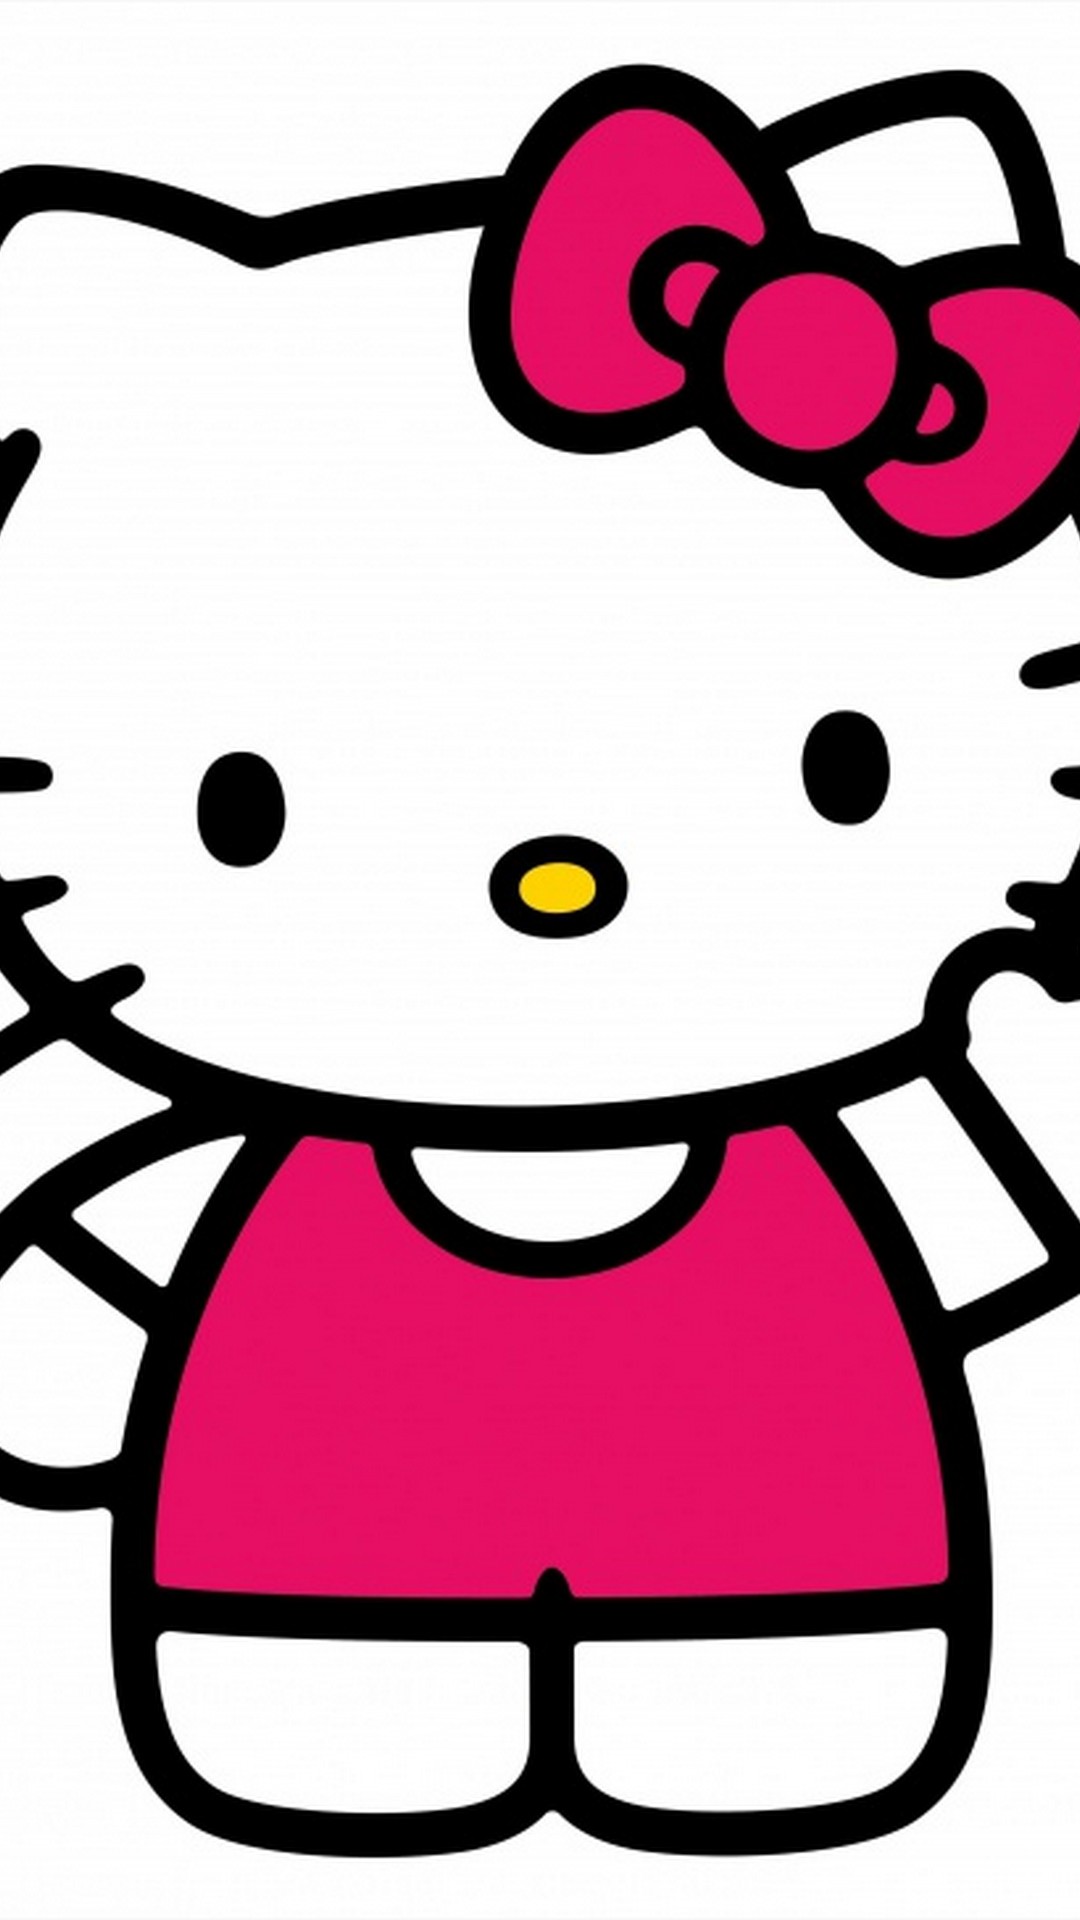 Sanrio Hello Kitty iPhone X Wallpaper with image resolution 1080x1920 pixel. You can use this wallpaper as background for your desktop Computer Screensavers, Android or iPhone smartphones